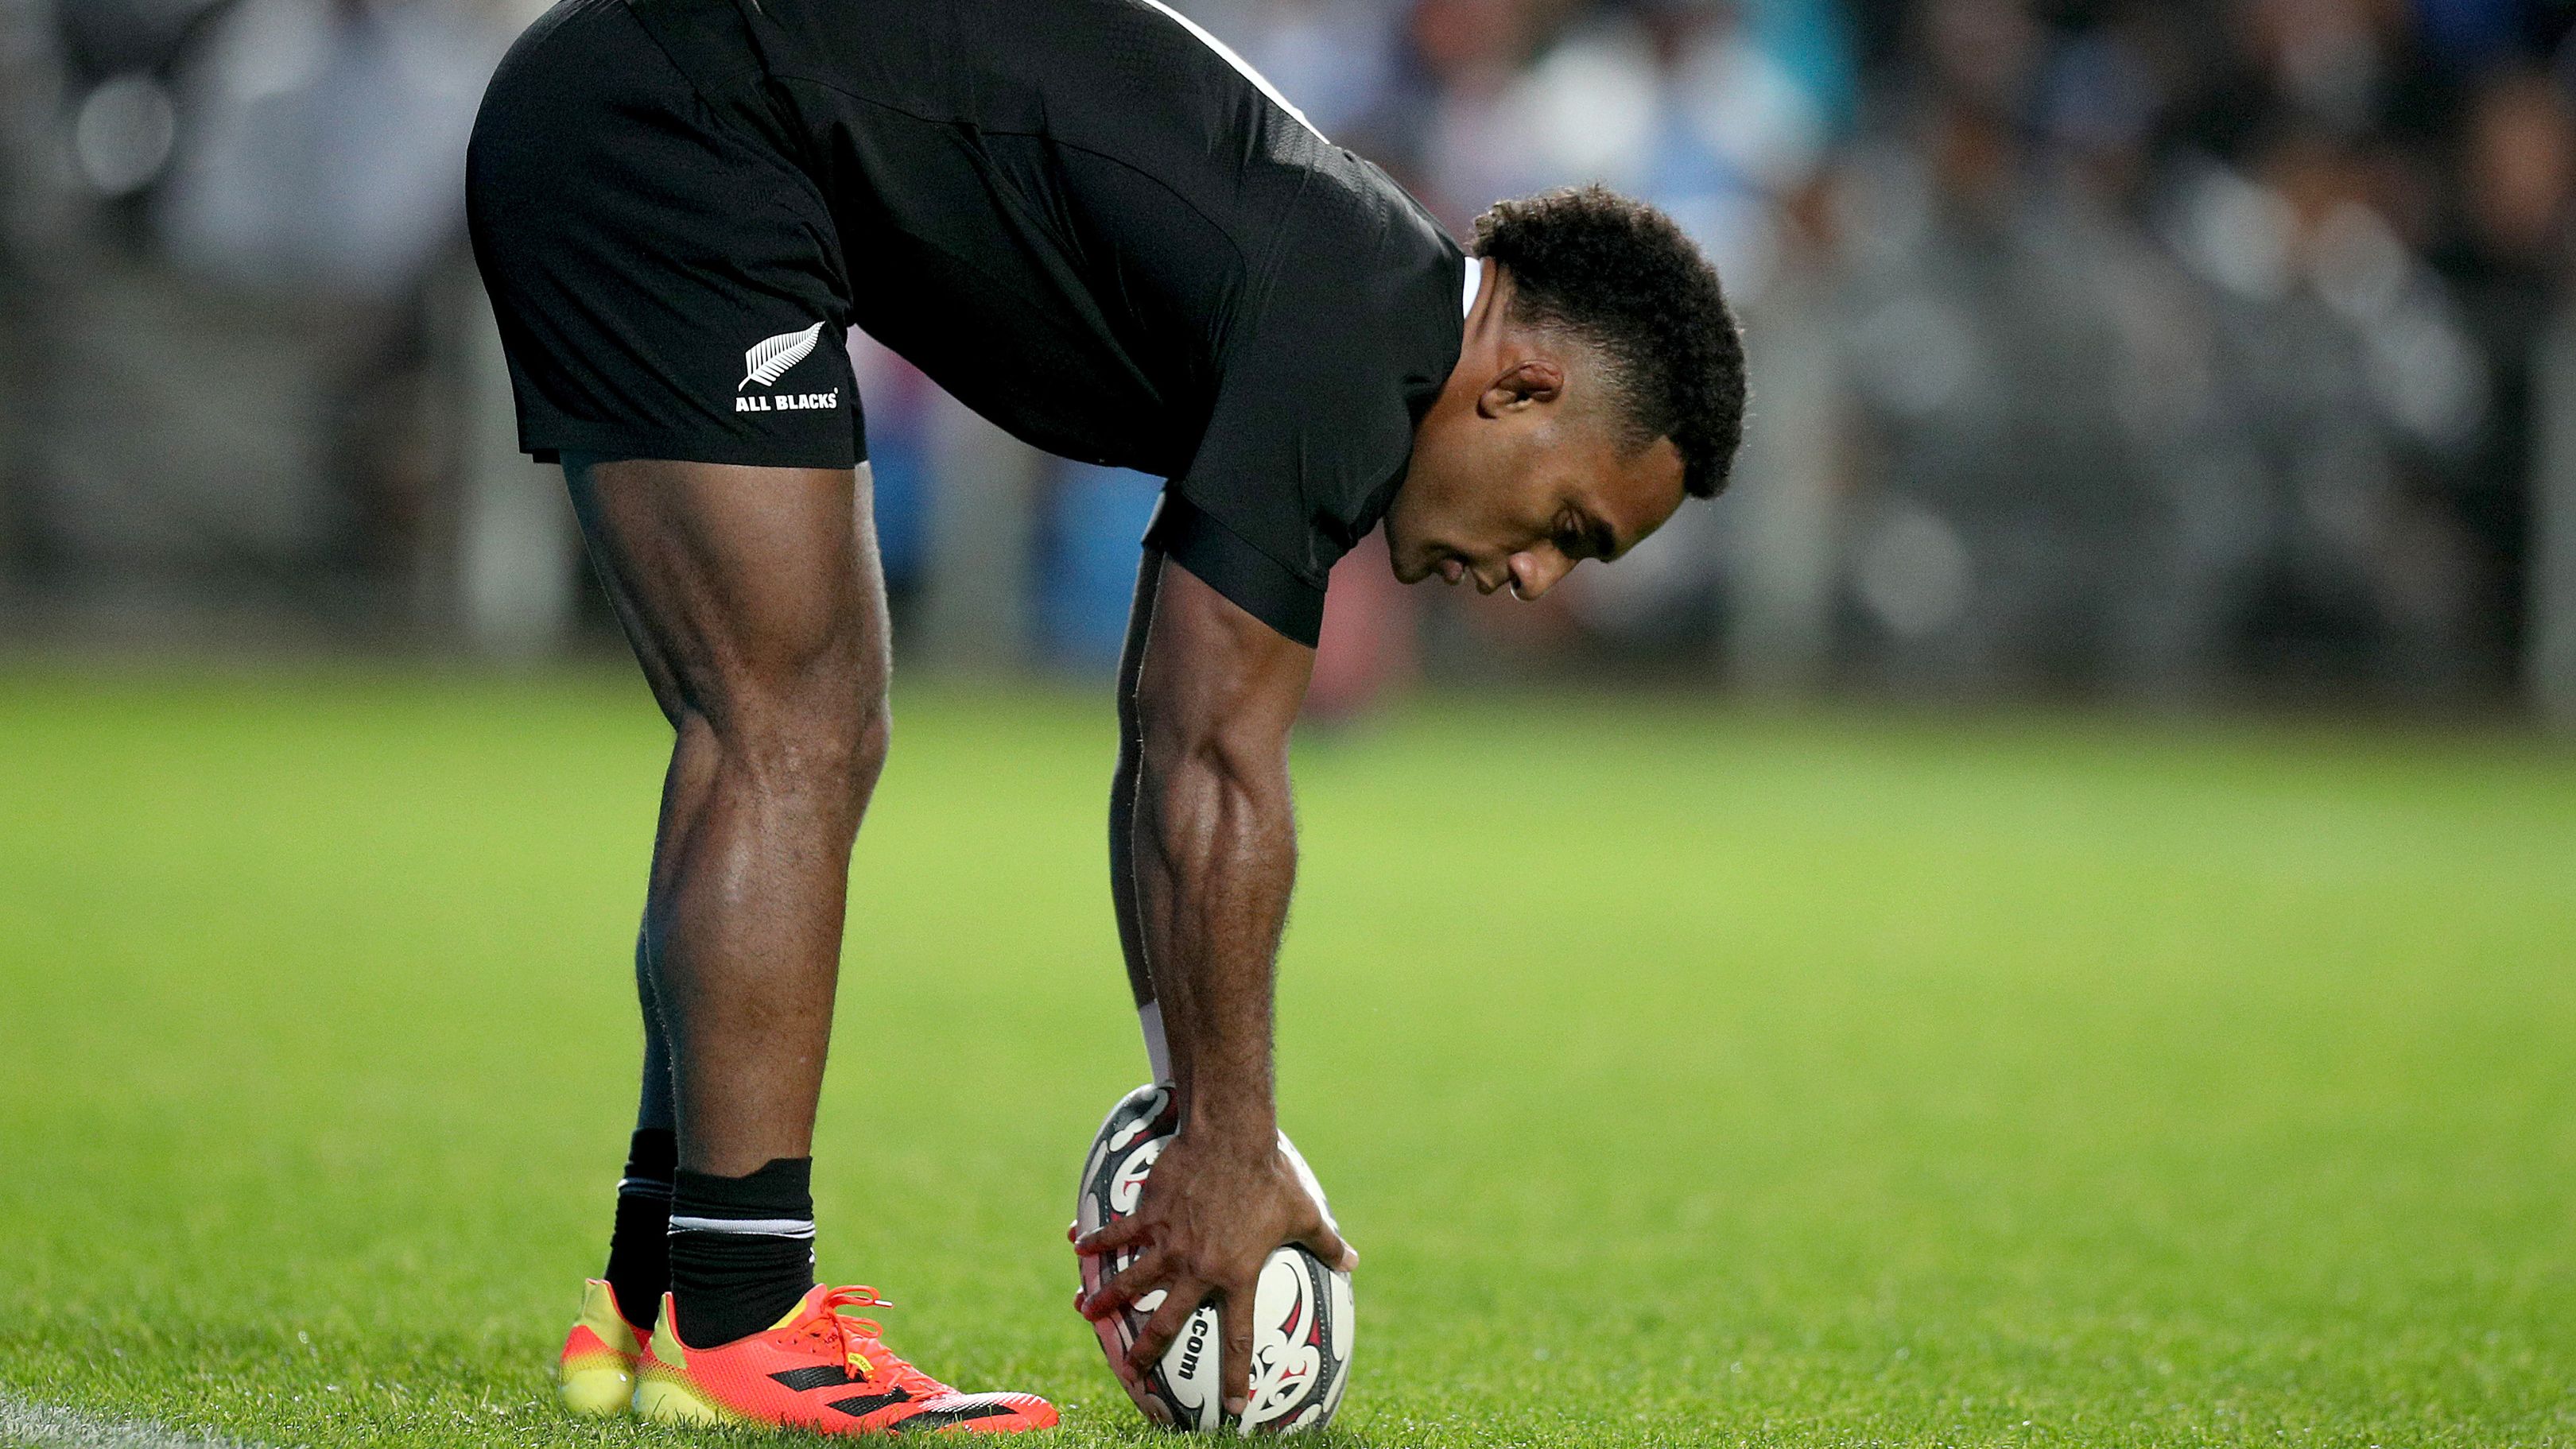 LIVE: Fiji giving All Blacks another fright